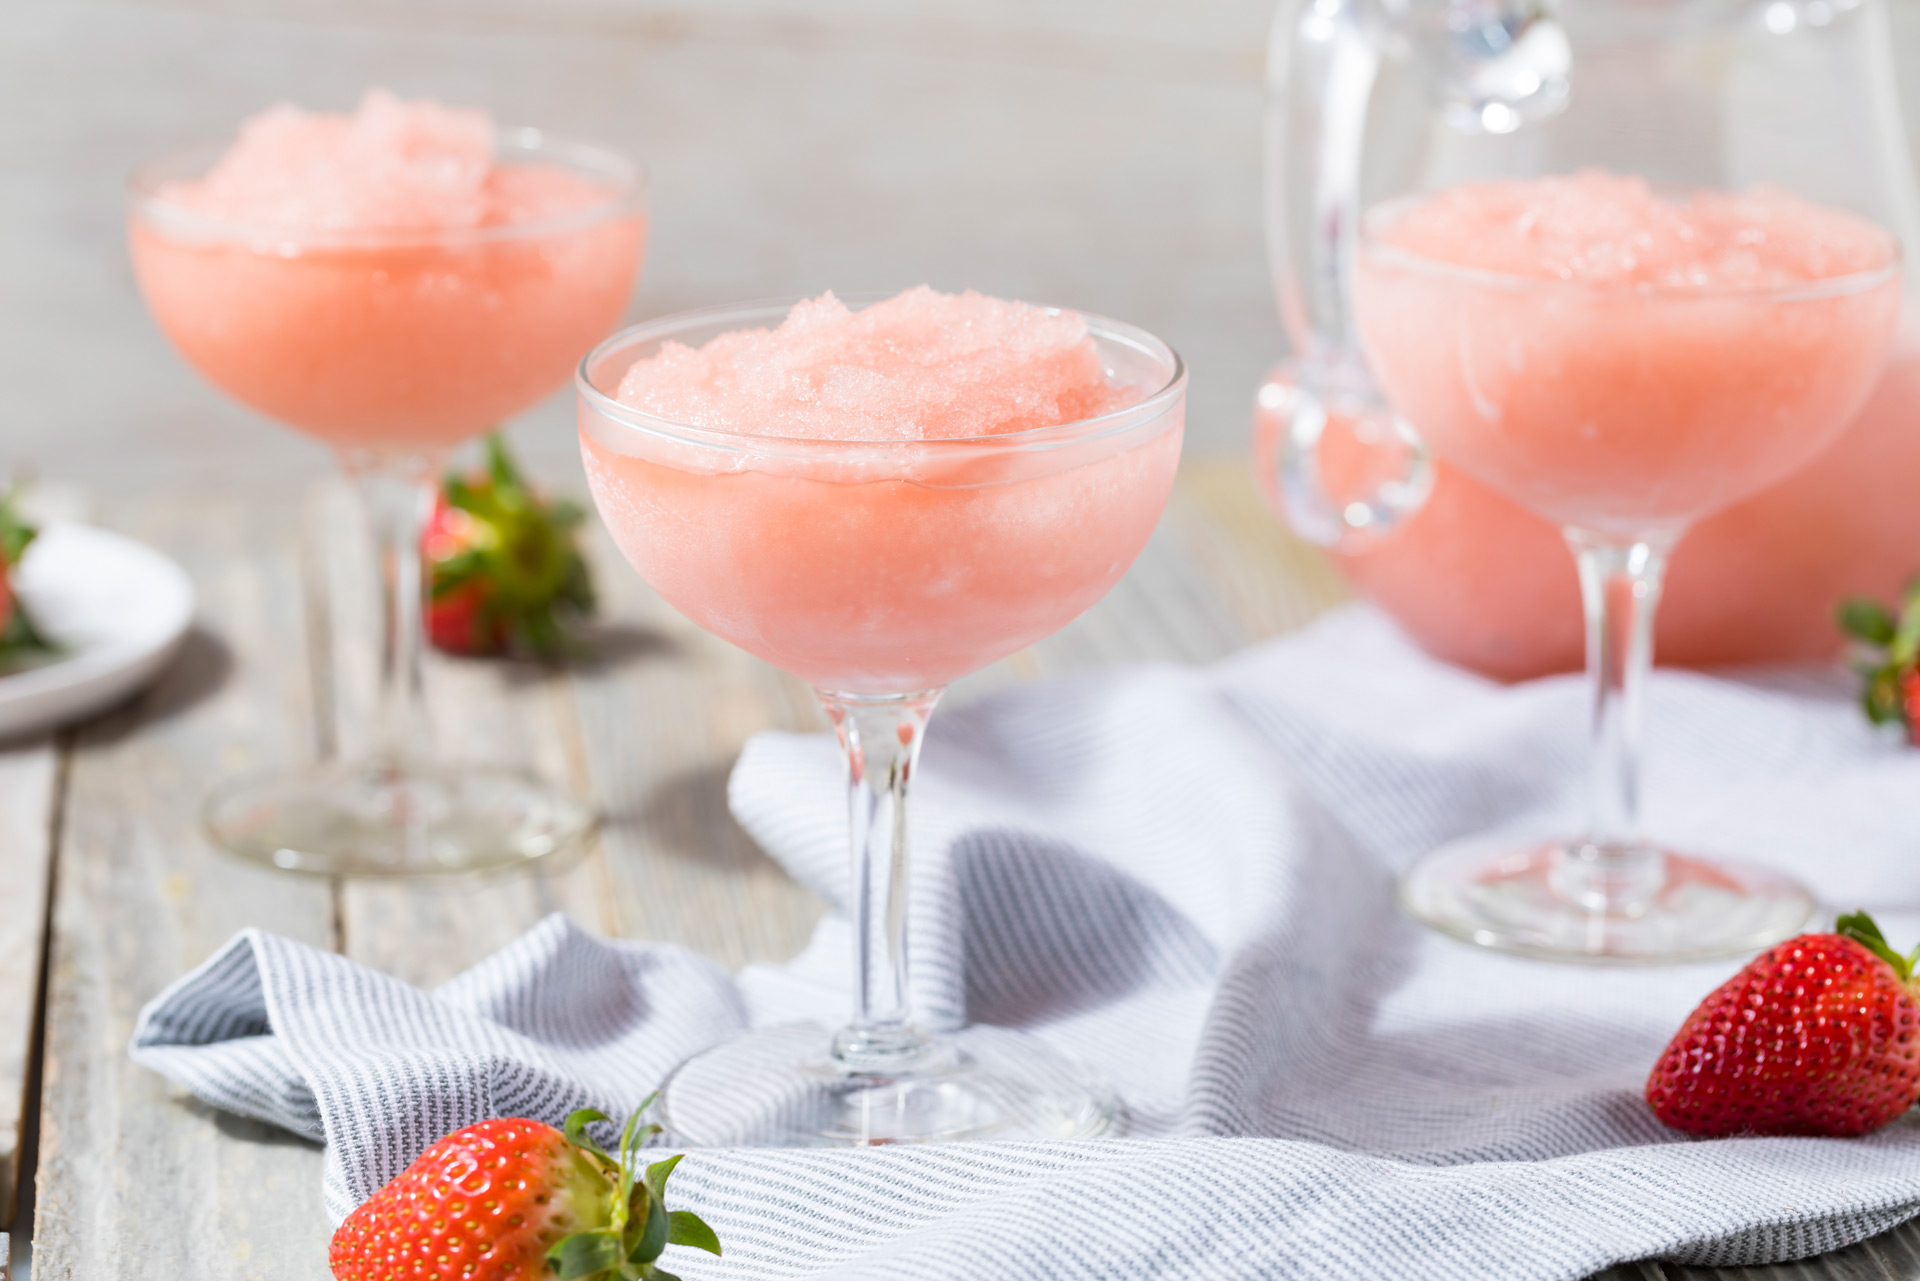 Frozen Cocktail Recipes to Try at Home